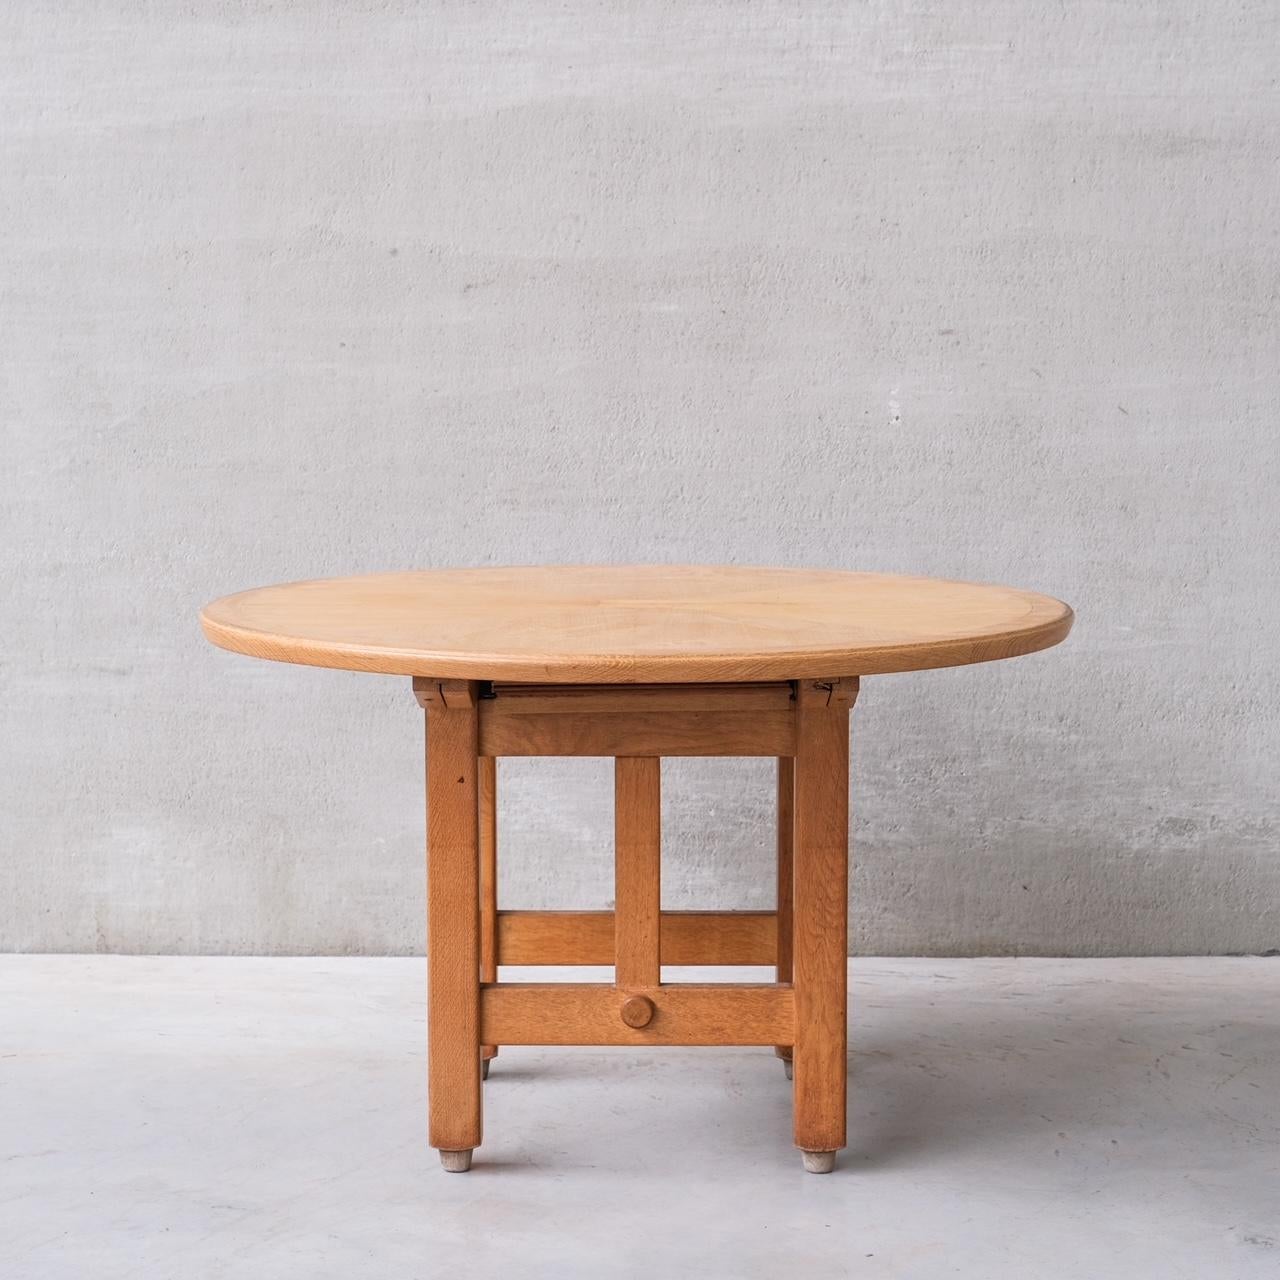 A circular extending dining table by designers Guillerme et Chambron.

France, c1960s.

When extended the width is 156 in cm.

Good vintage condition, some scuffs and wear commensurate with age.

Internal ref: 18/10/23/030.

Location: Belgium